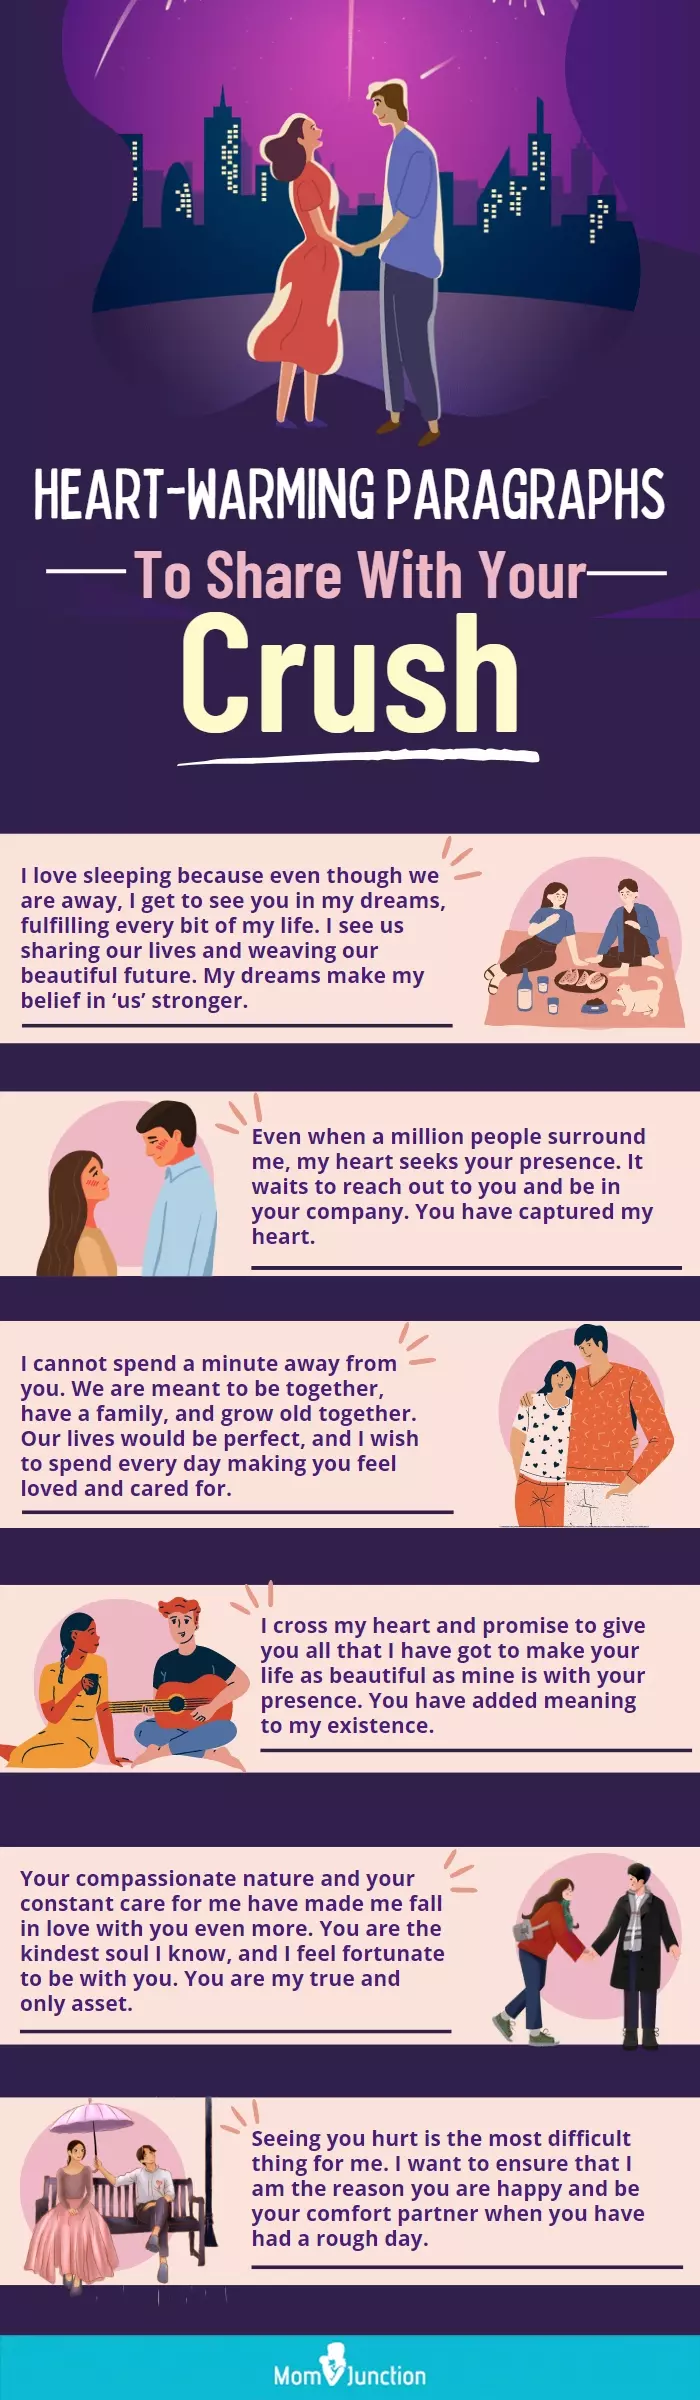 lovely paragraphs for your crush (infographic)